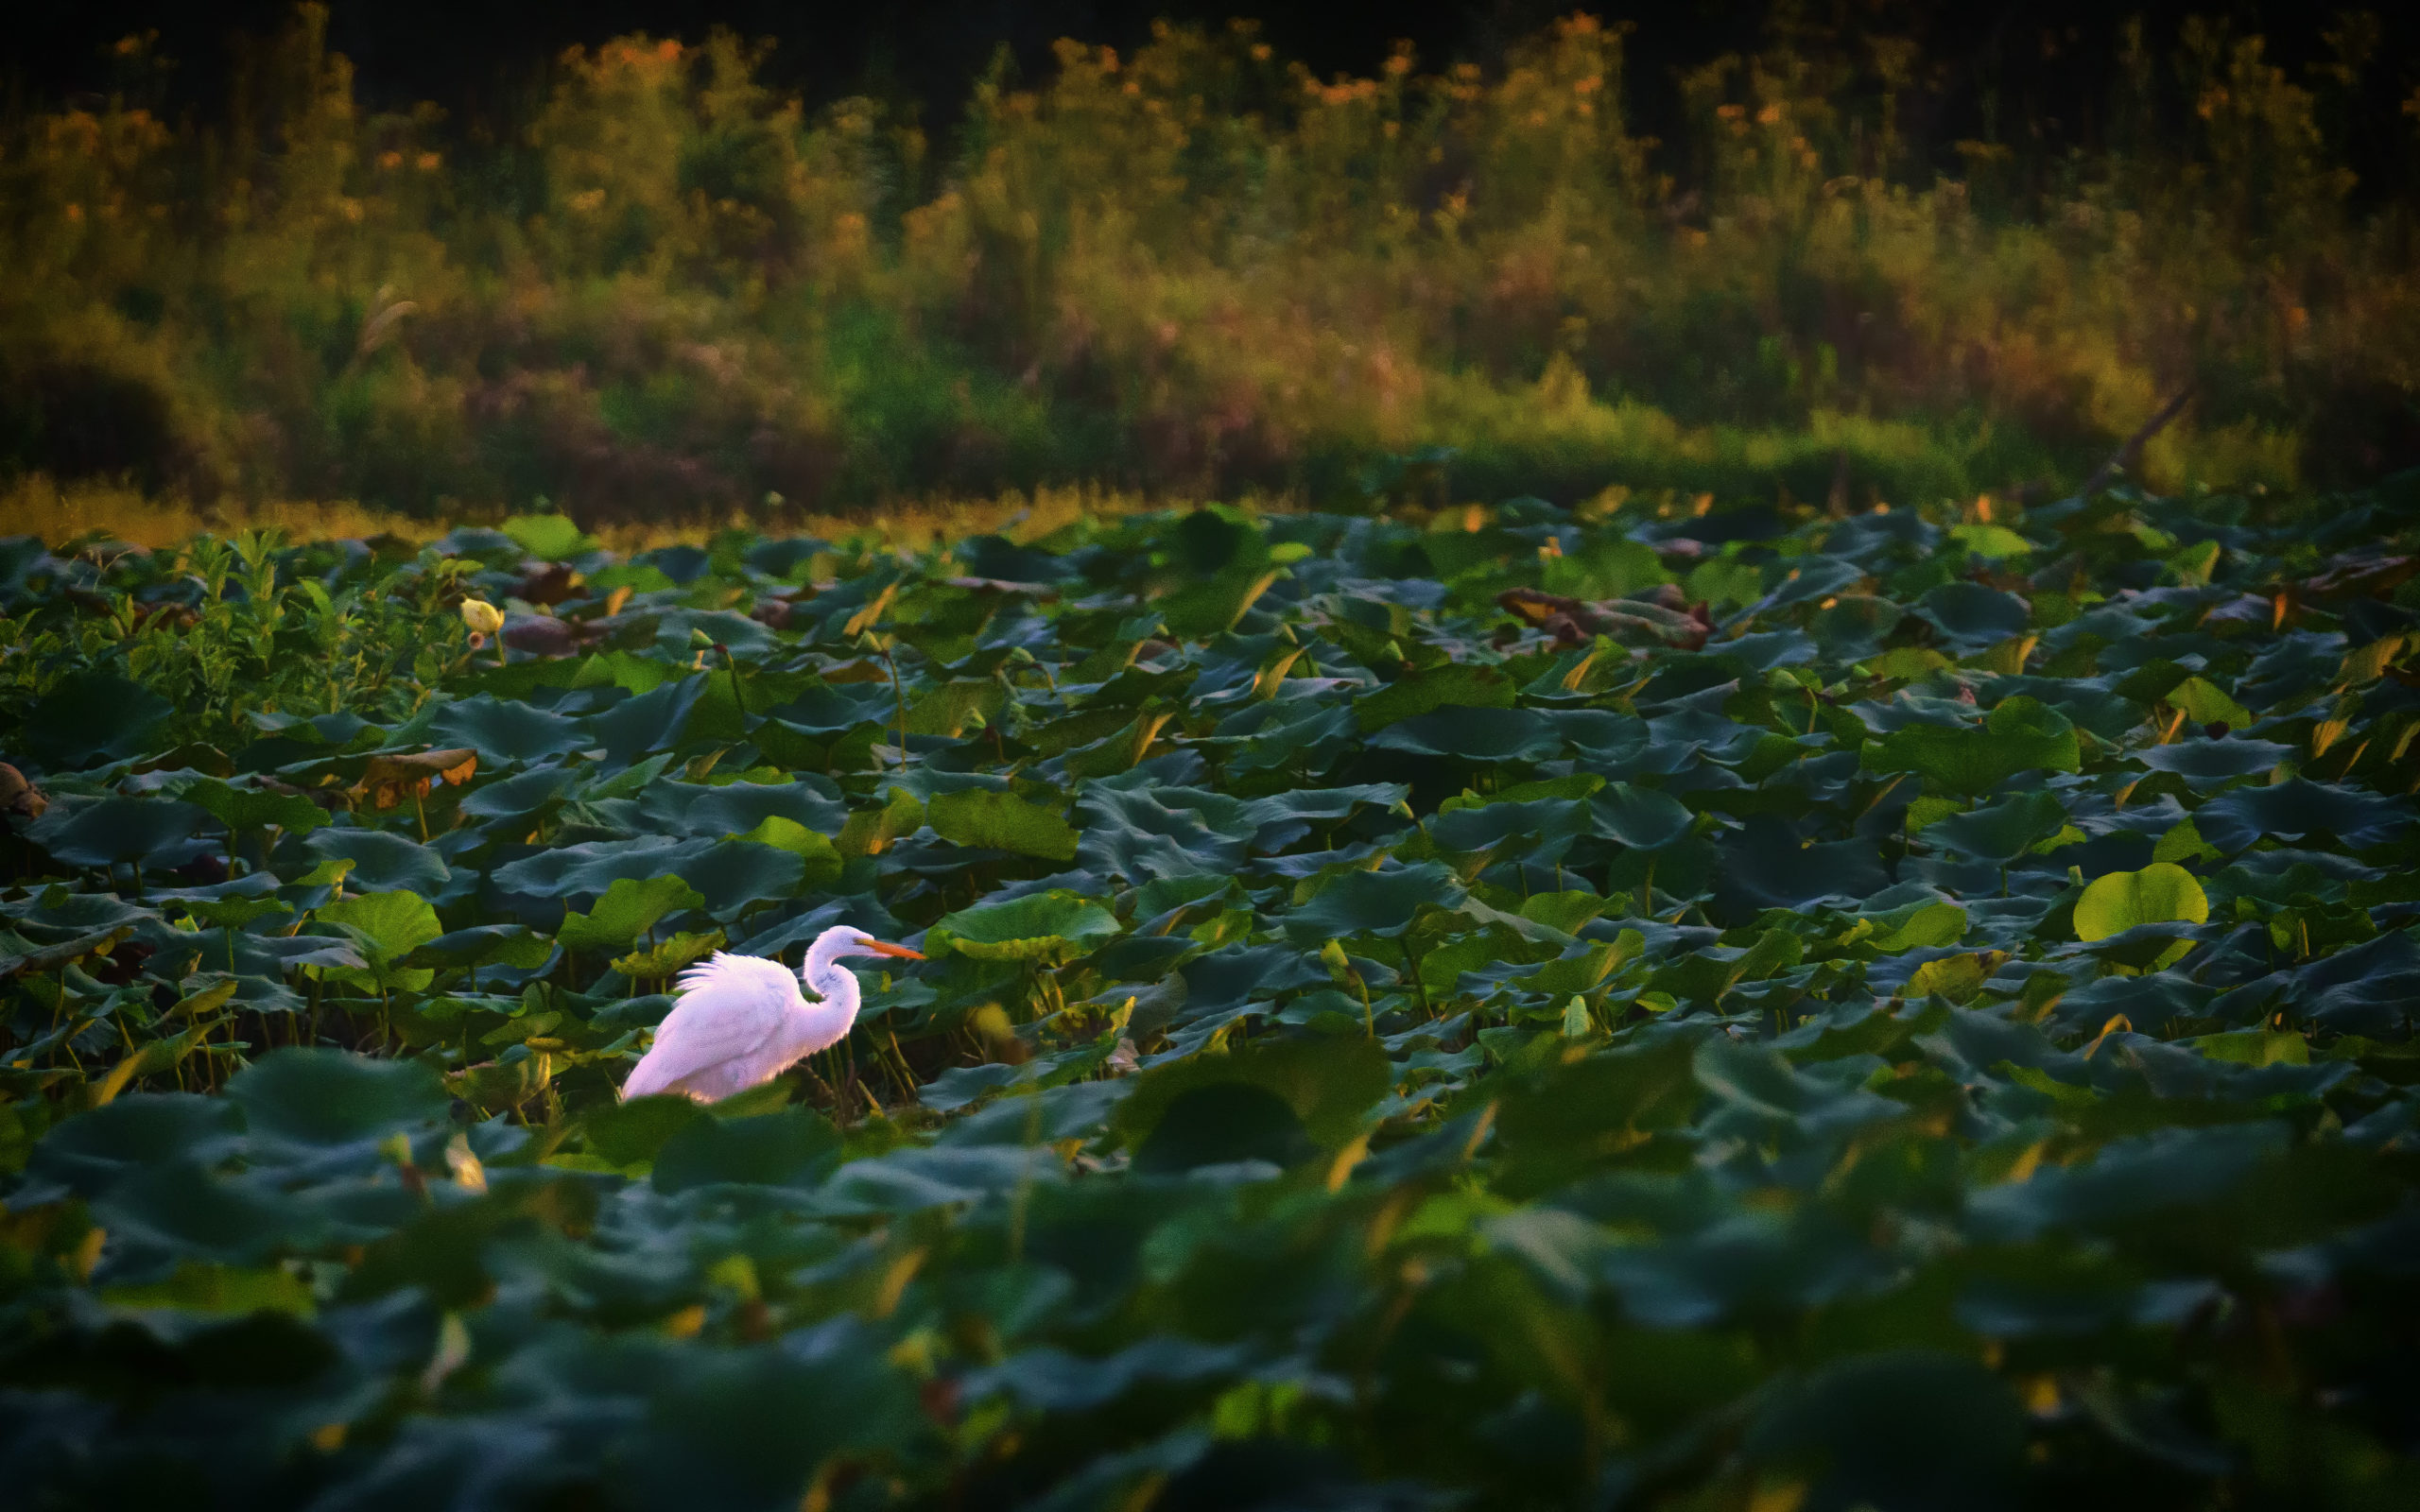 A white bird stands in a wetland.